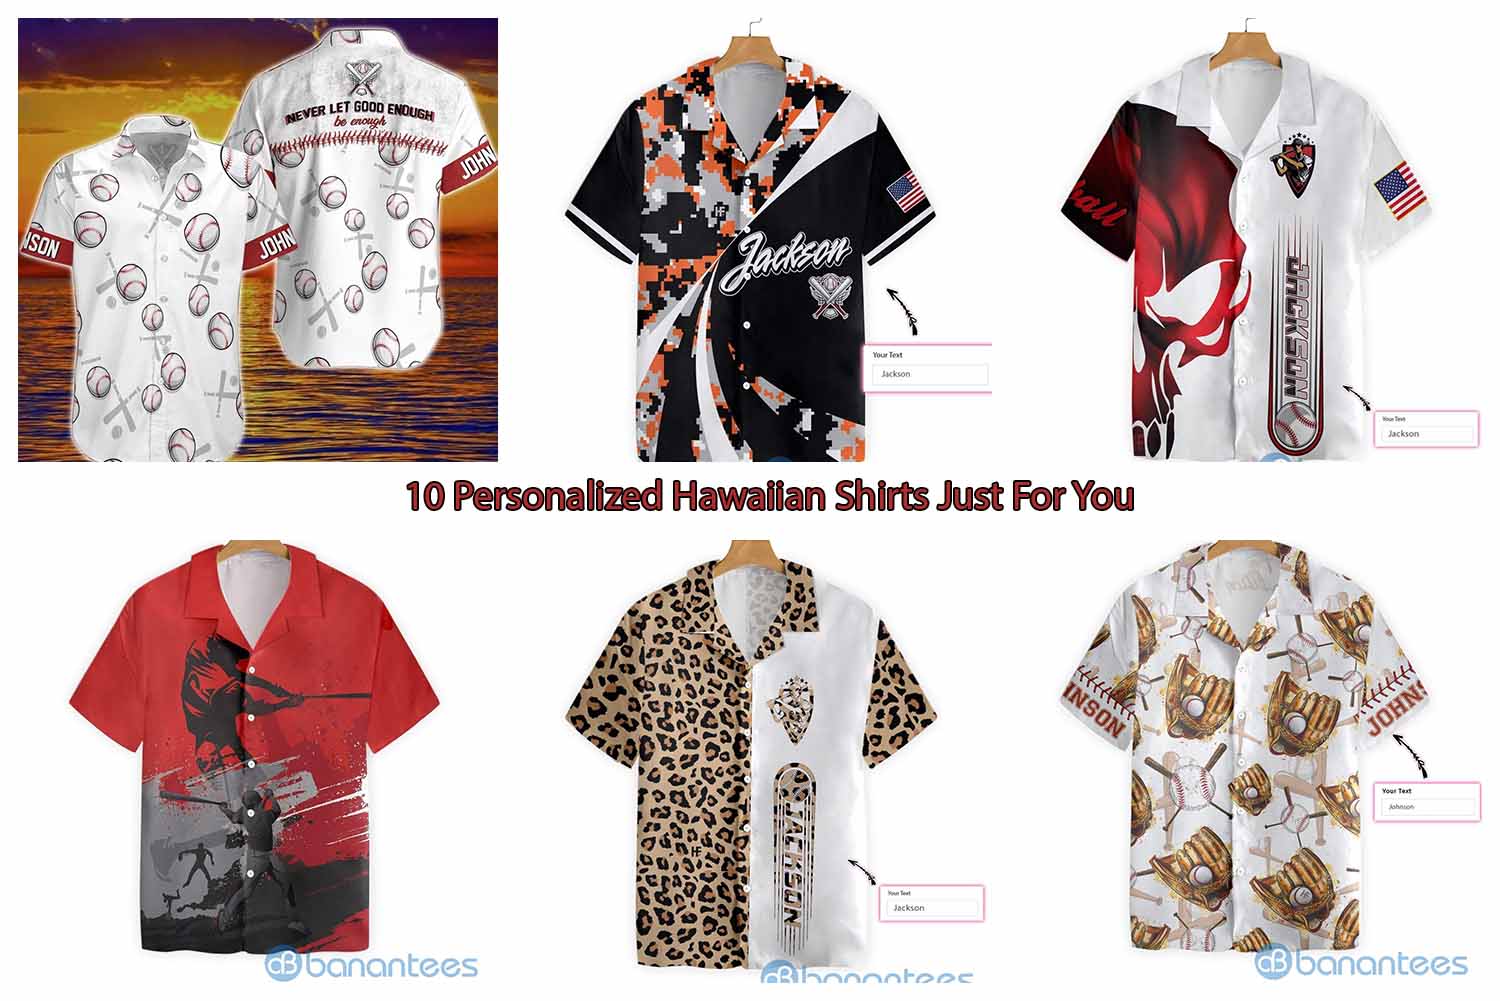 10 Personalized Hawaiian Shirts Just For You